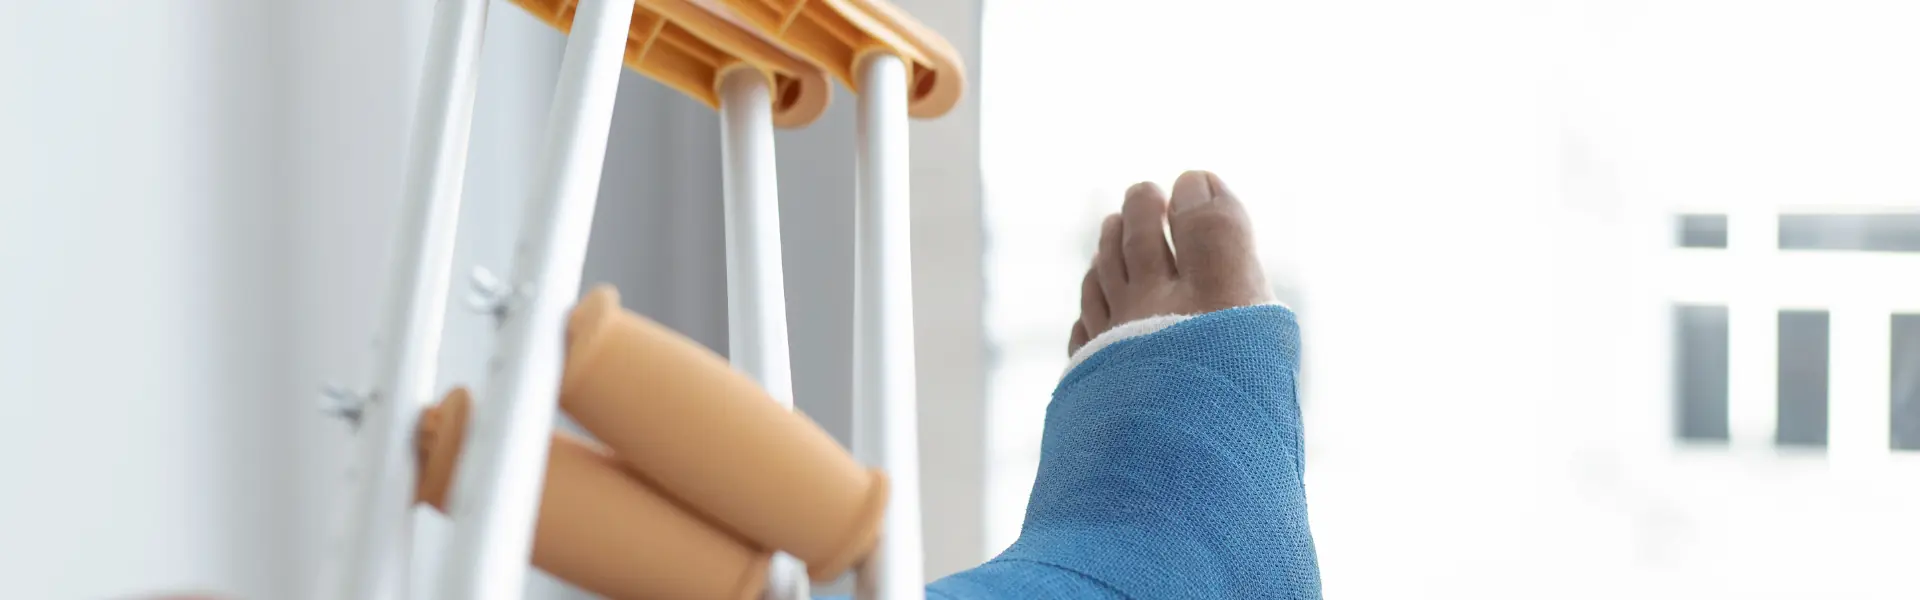 A leg in a cast with crutches